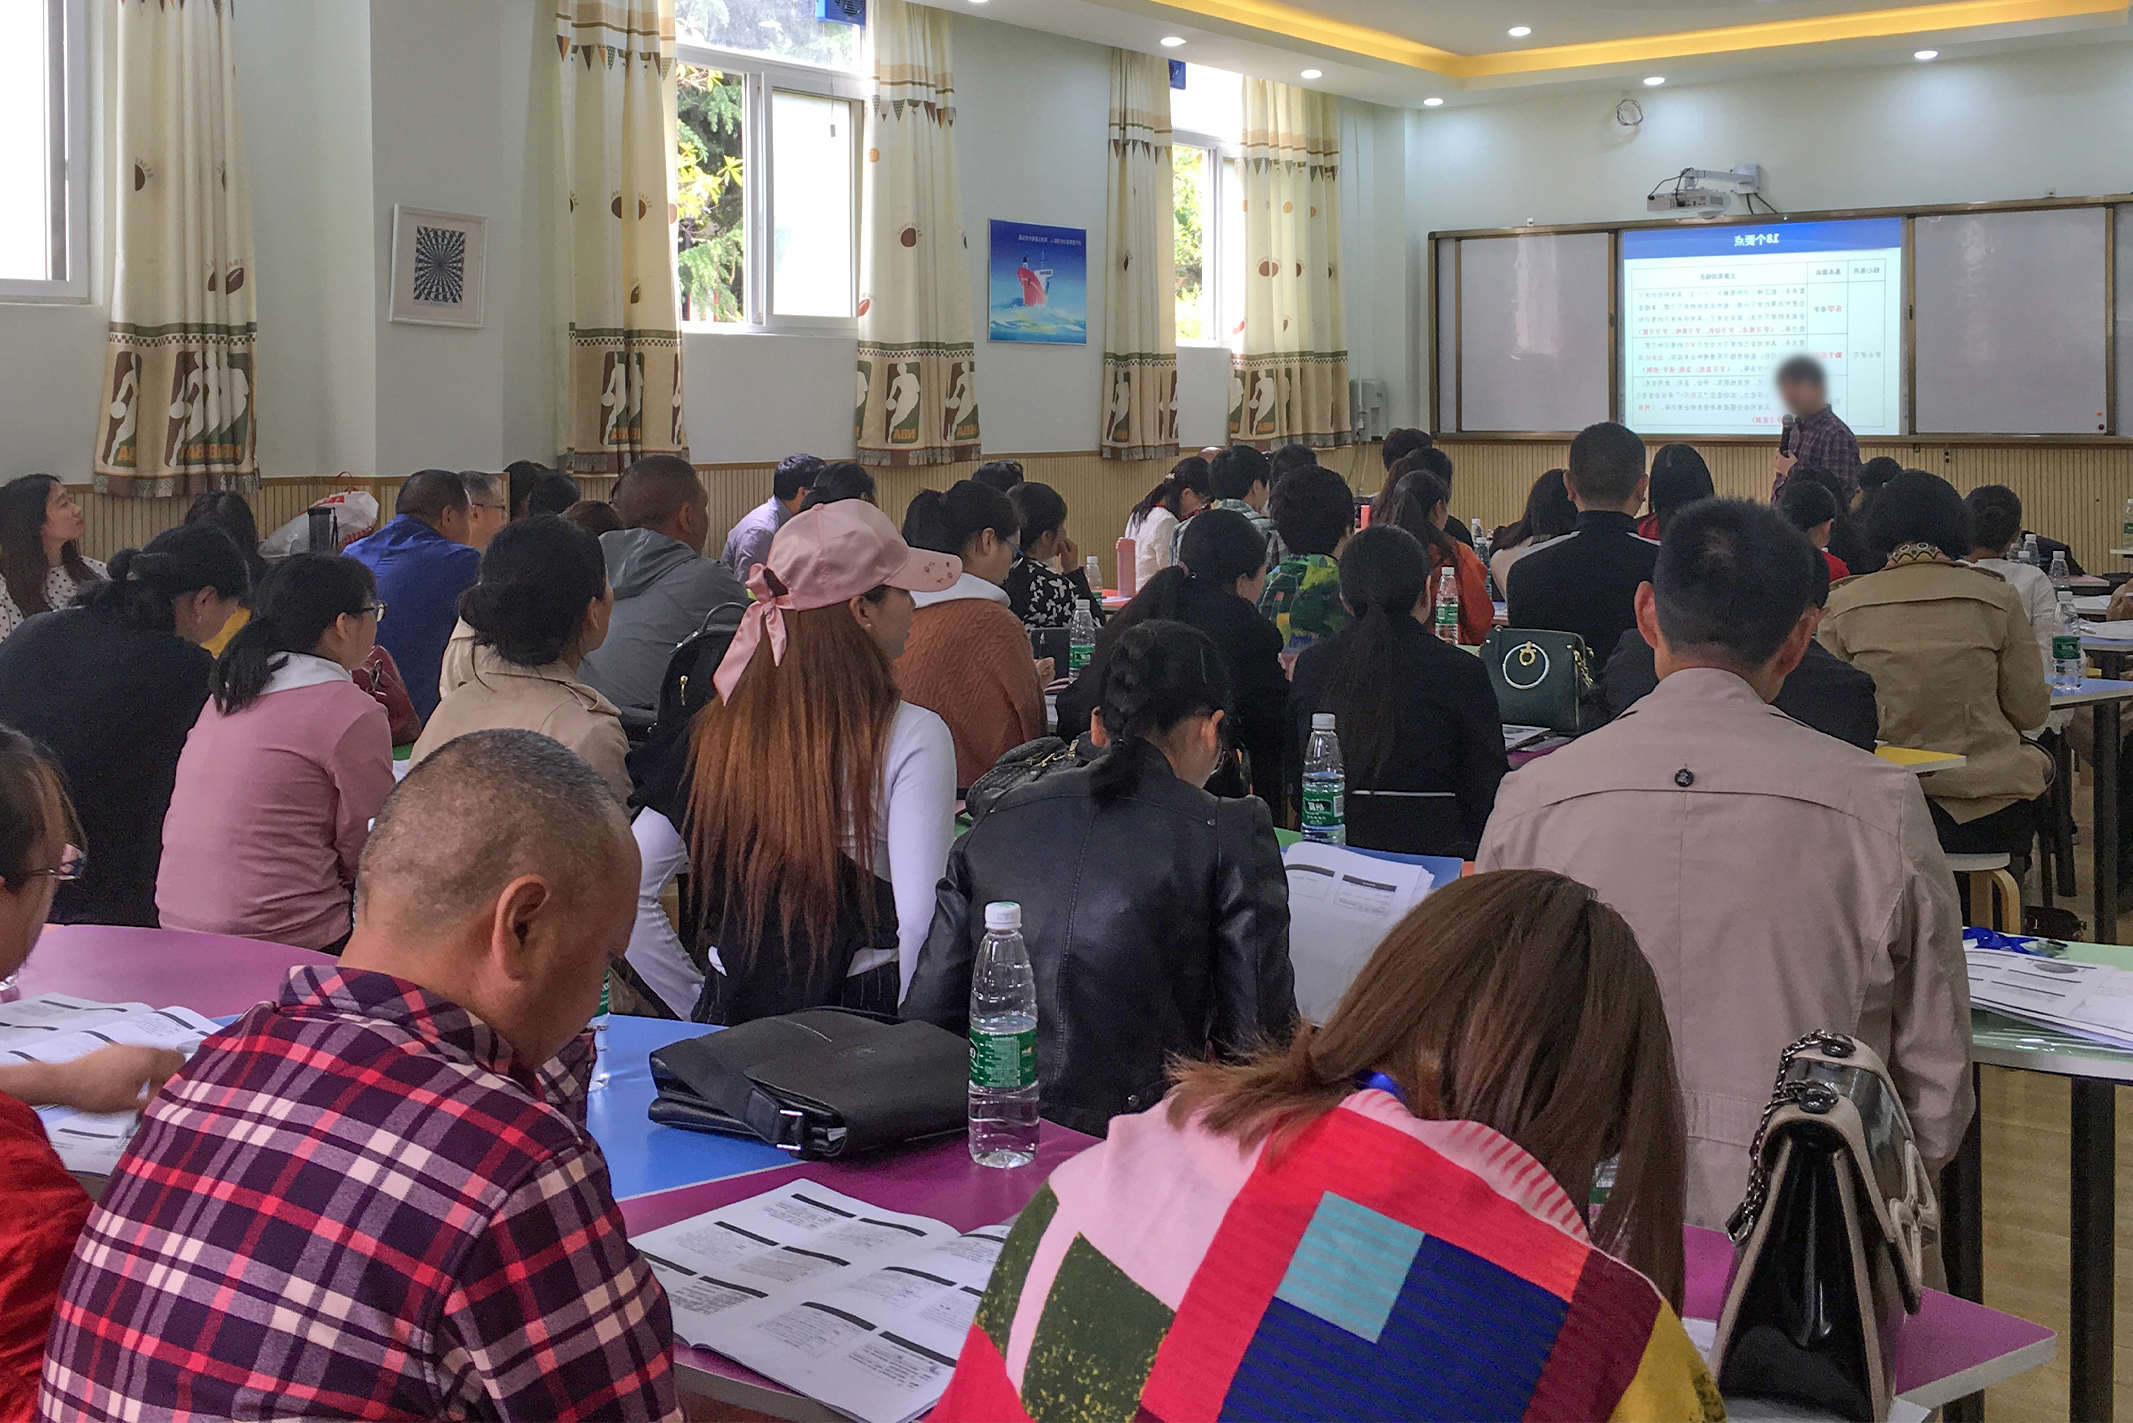 Chinese Christians sitting in rows behind desks listening to a speaker talk at a training conference